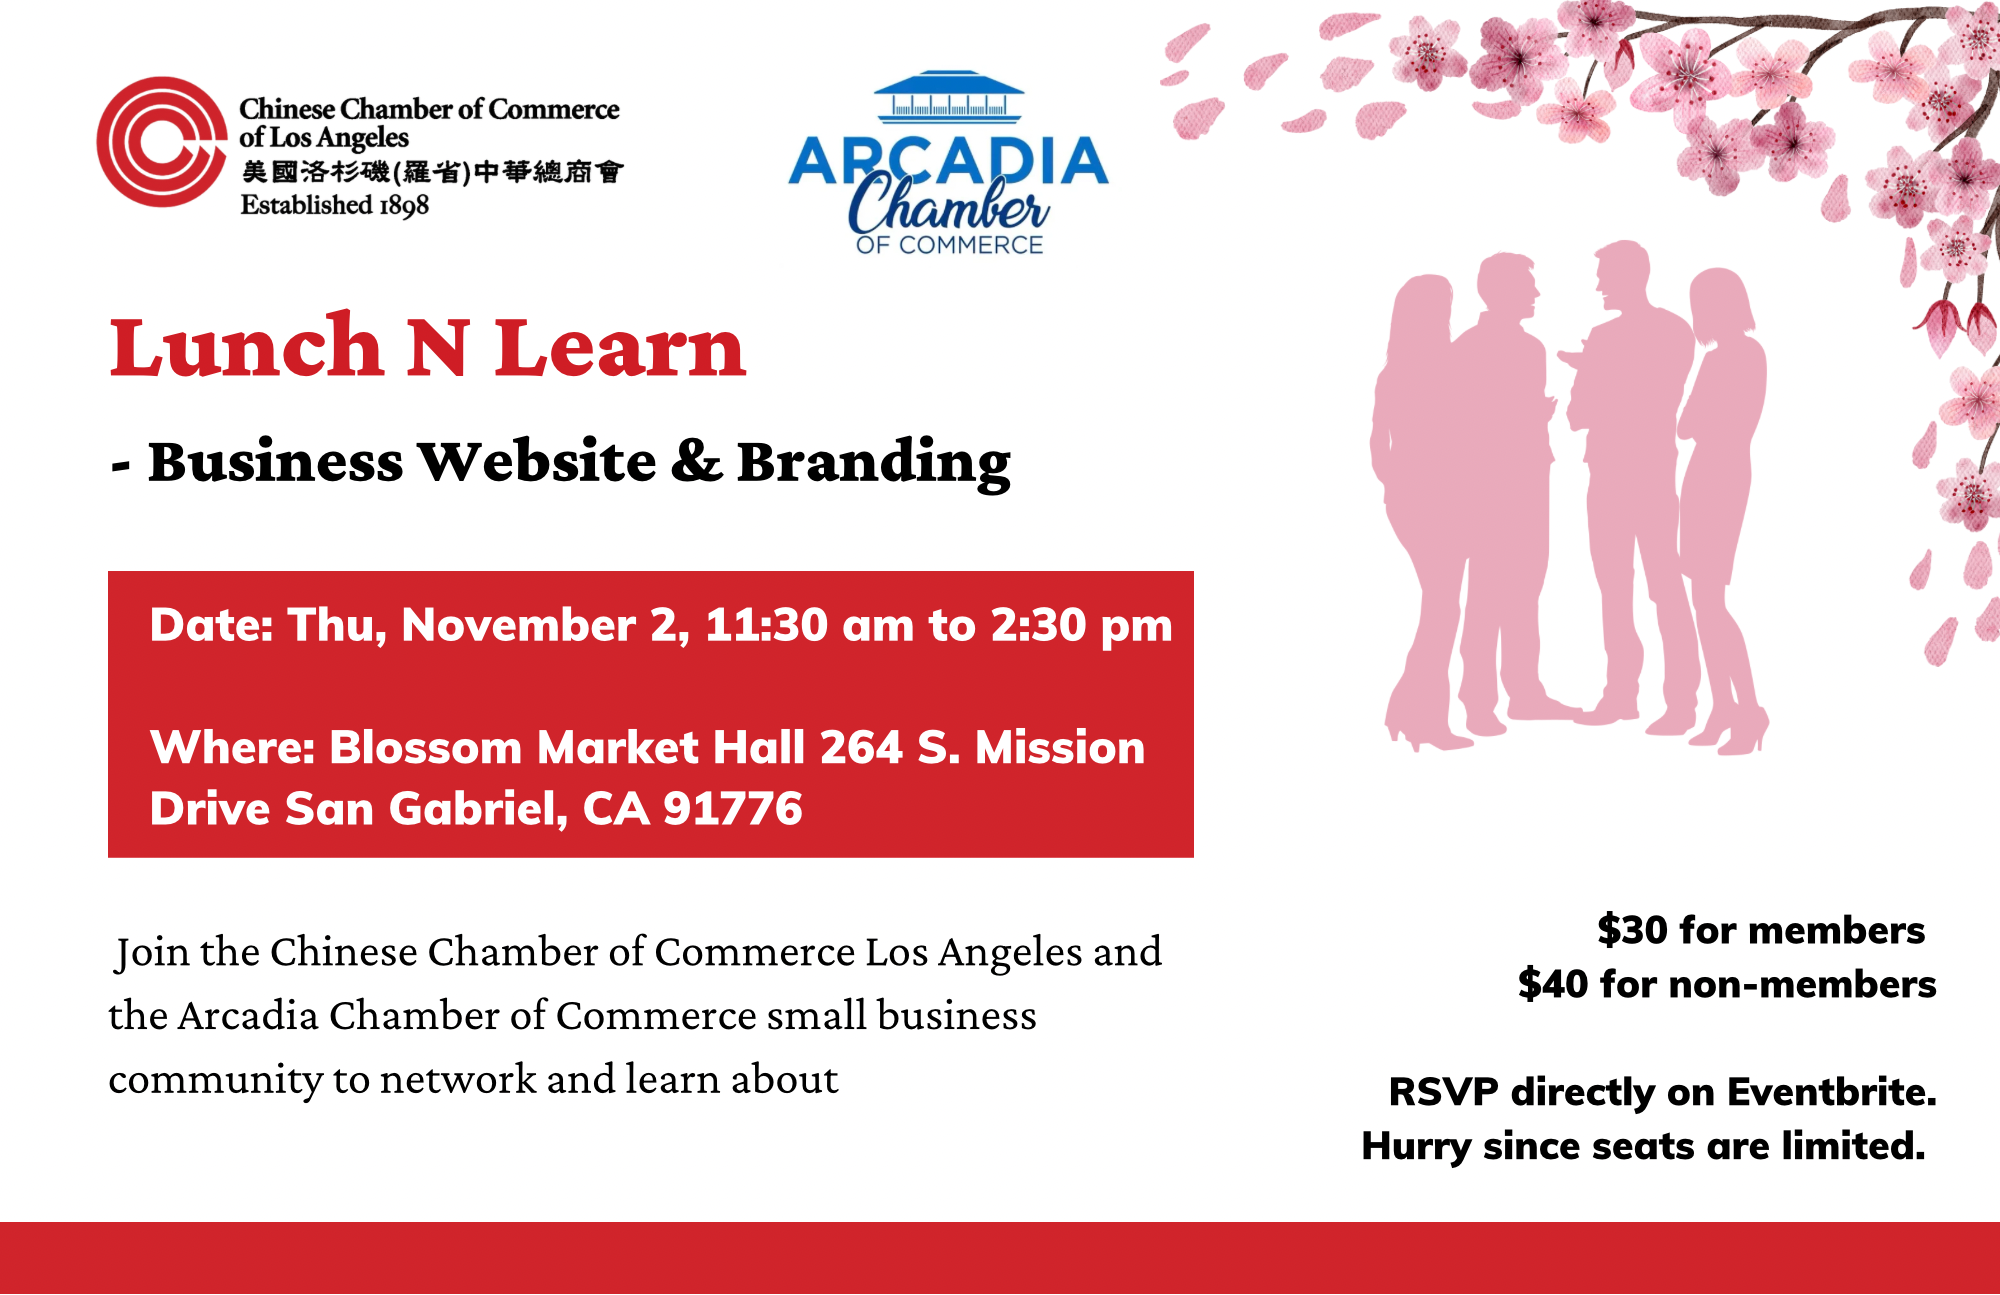 lunch and learn with Chinese Chamber LA on November 2